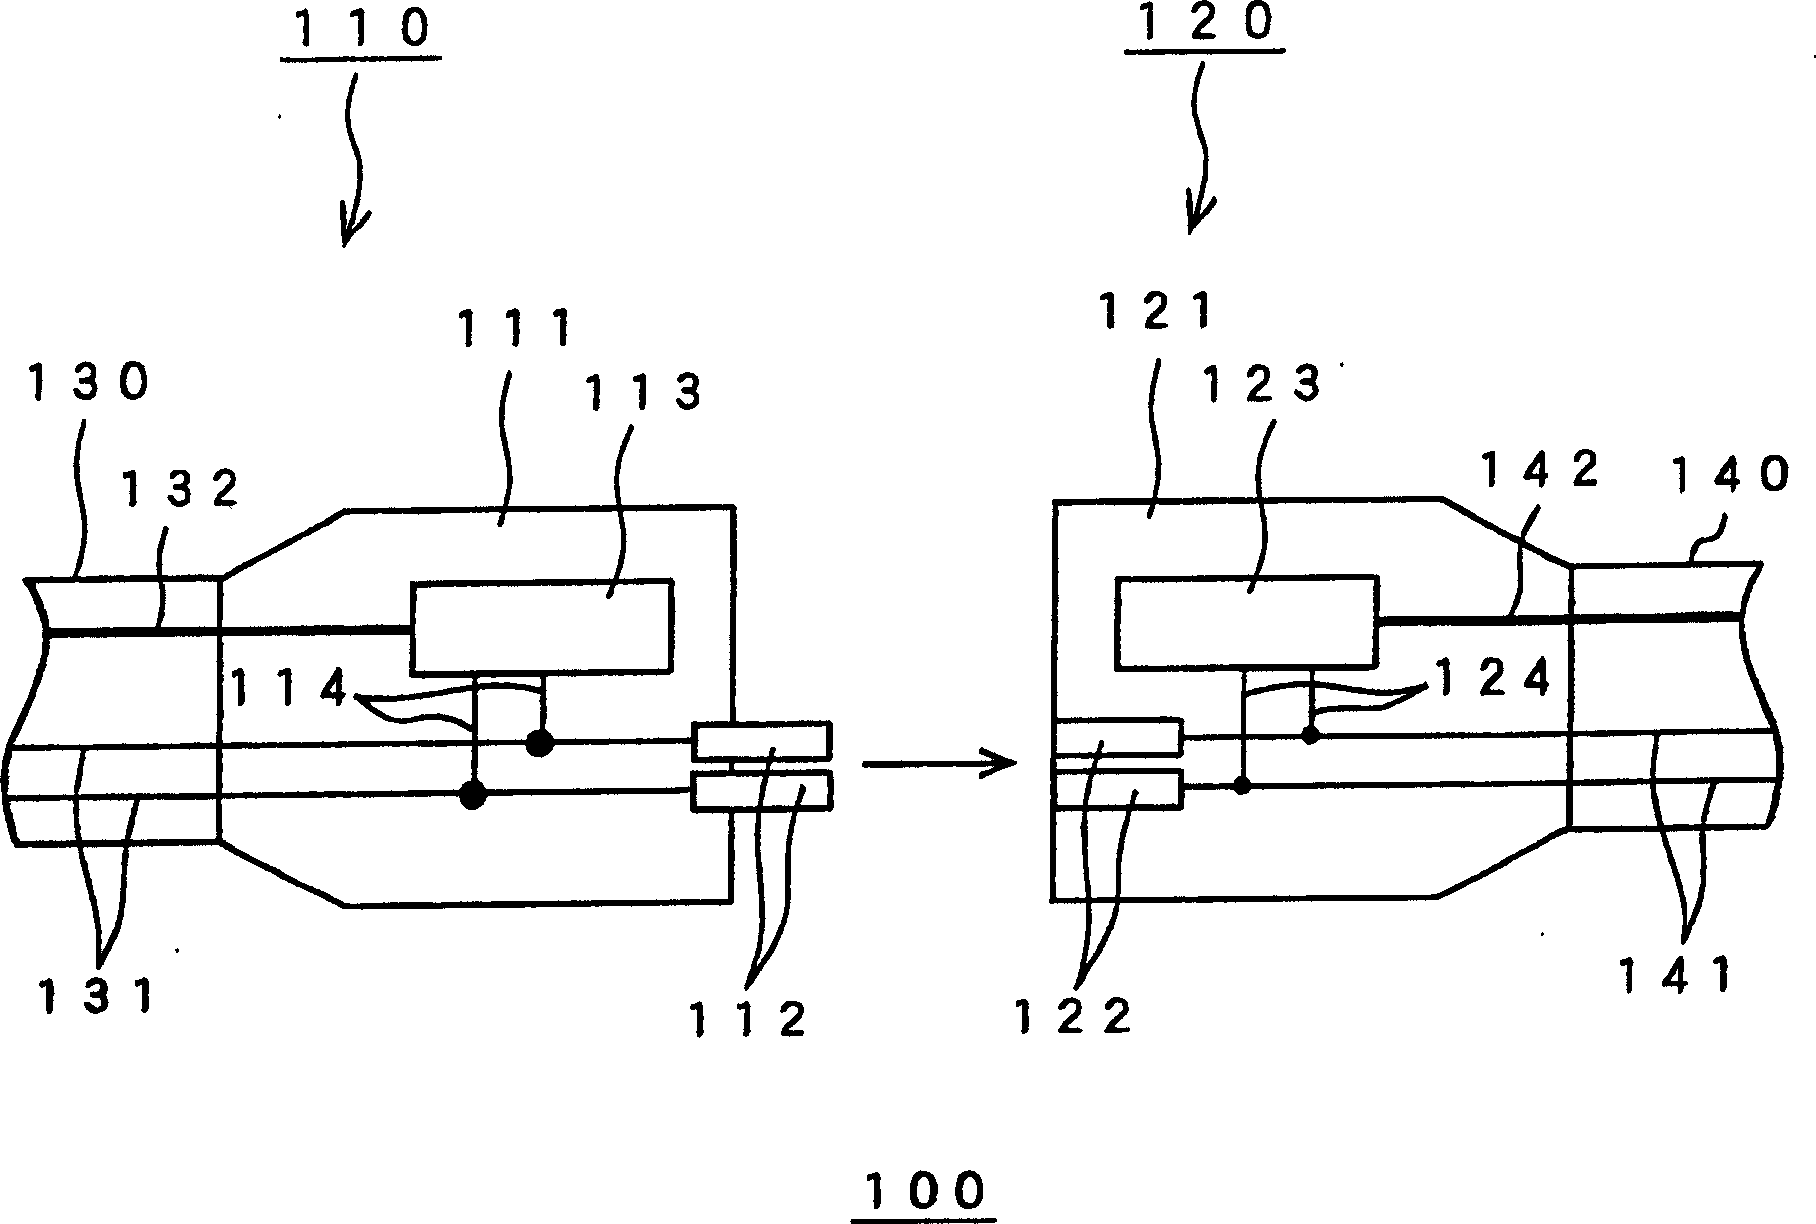 Electrooptical composite connector, electrooptical composite cable and network appts.